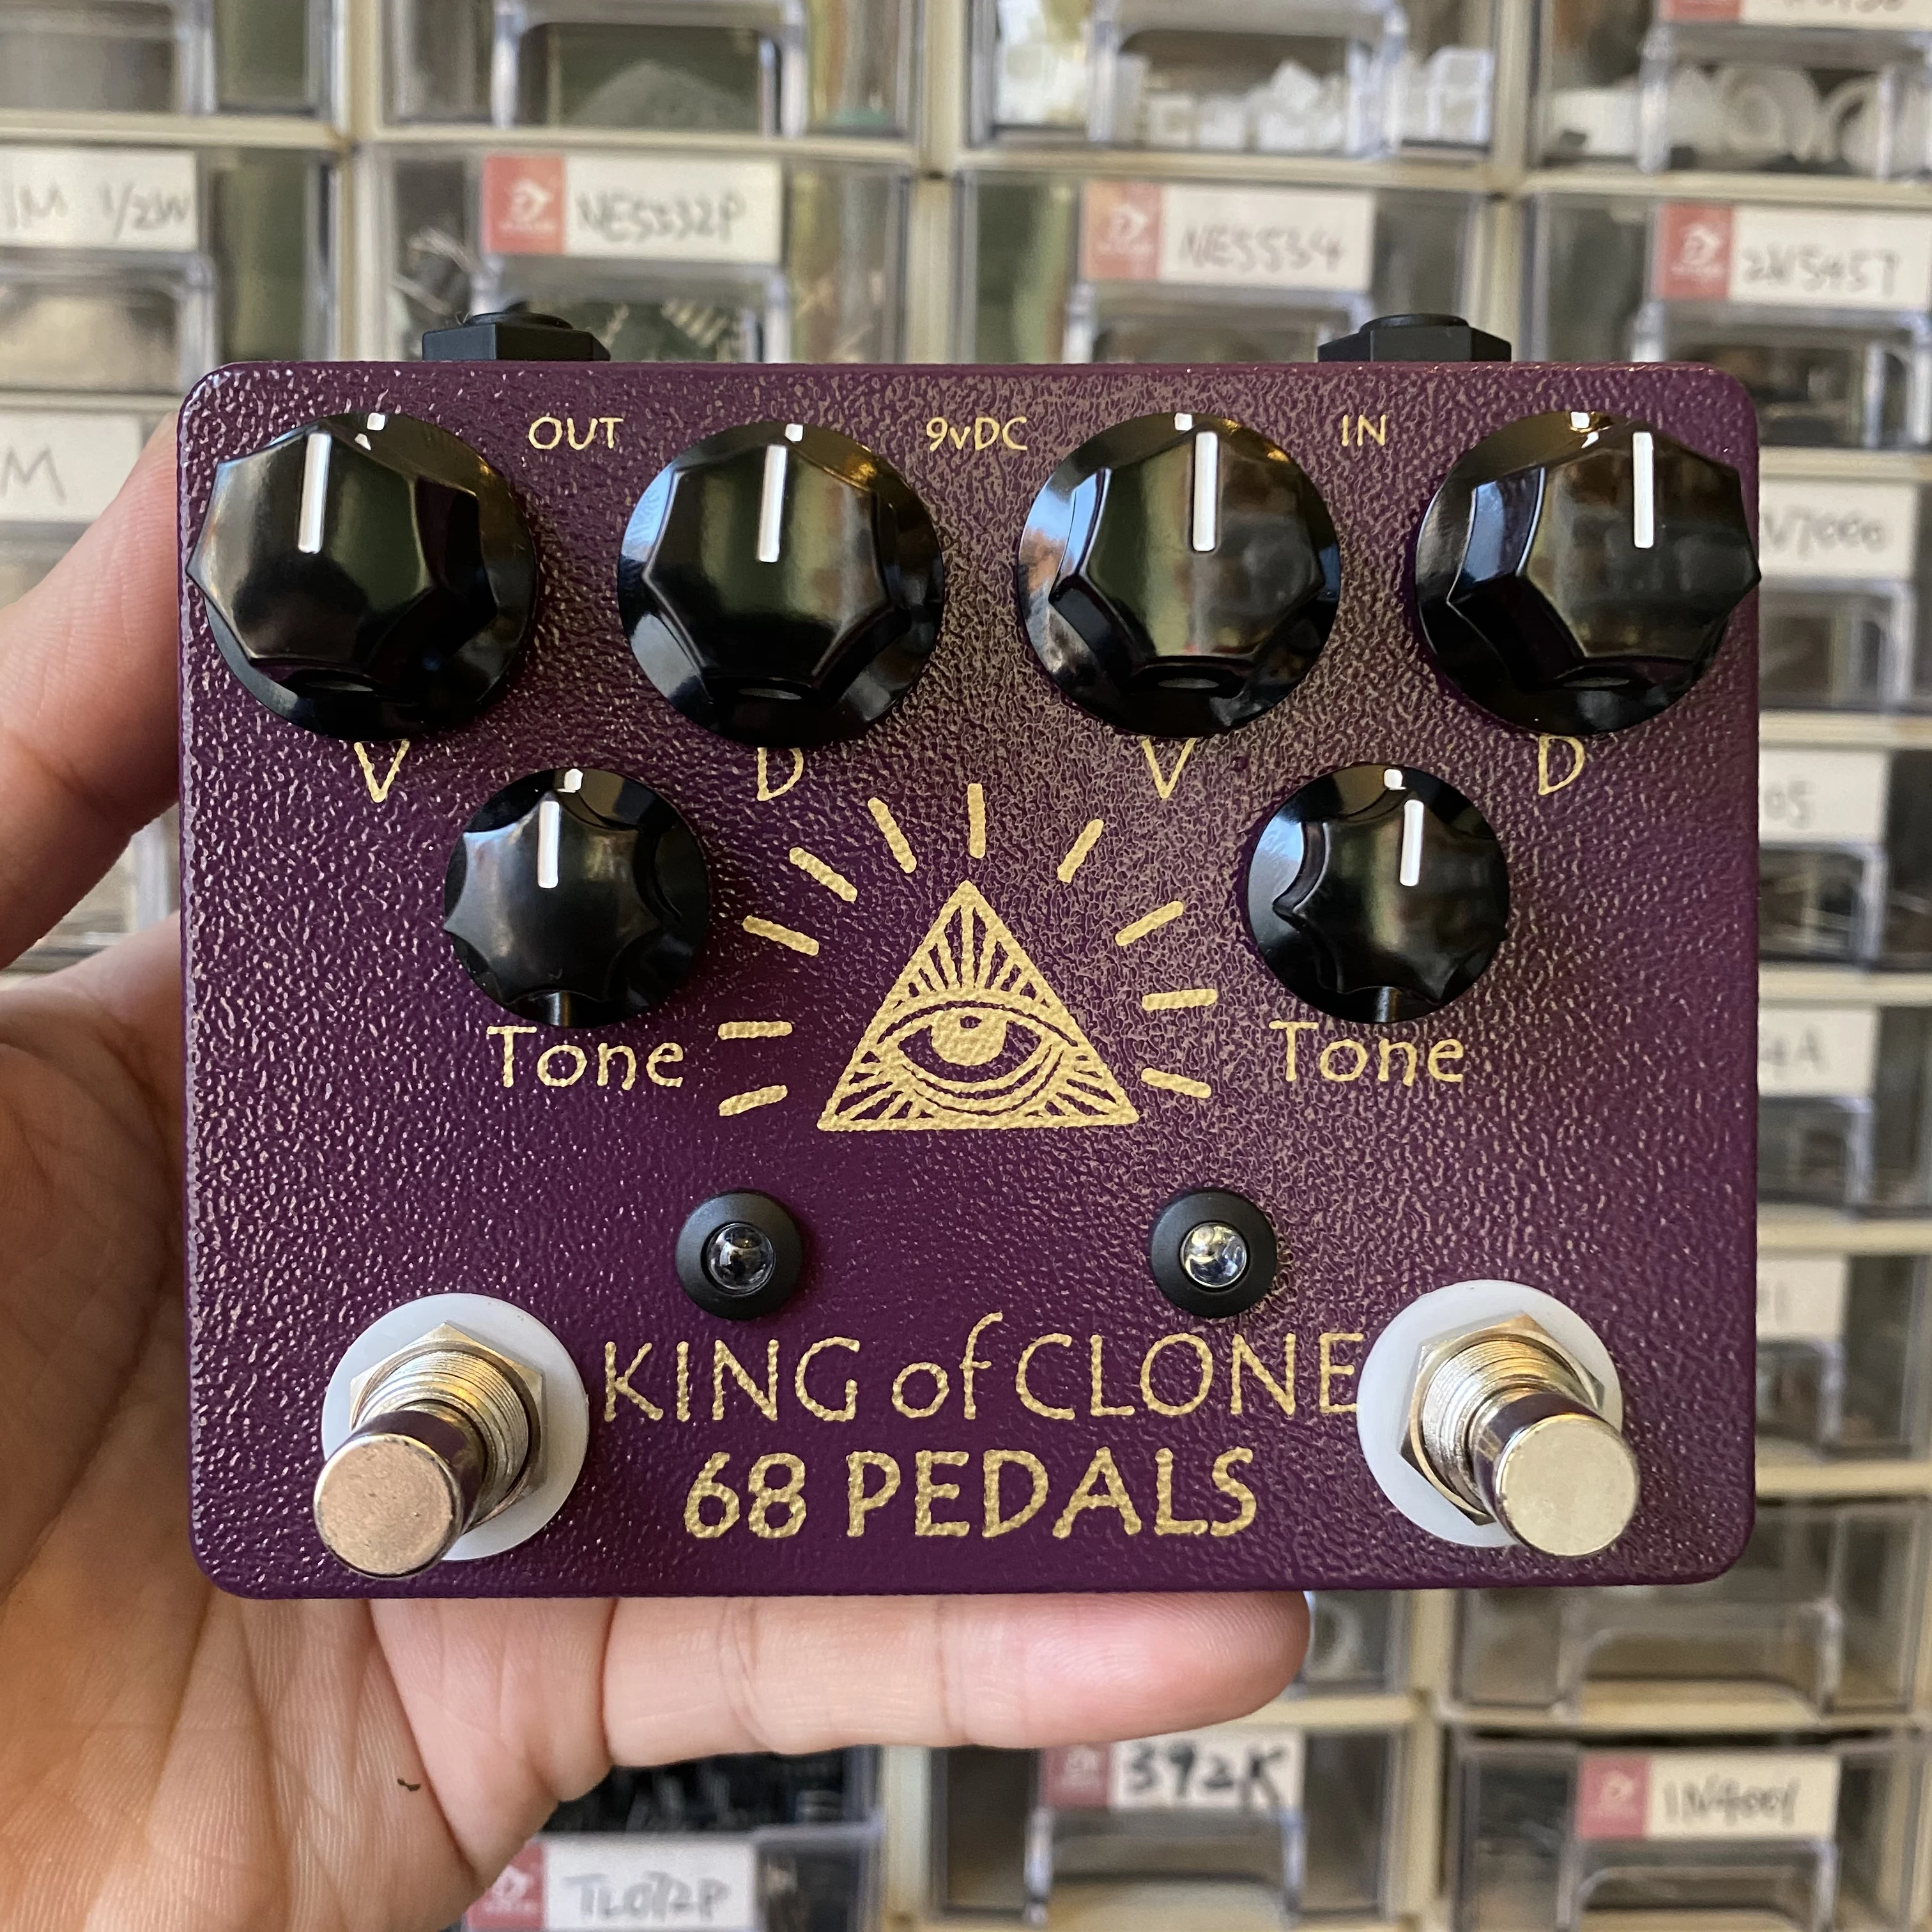 68pedals king of clone